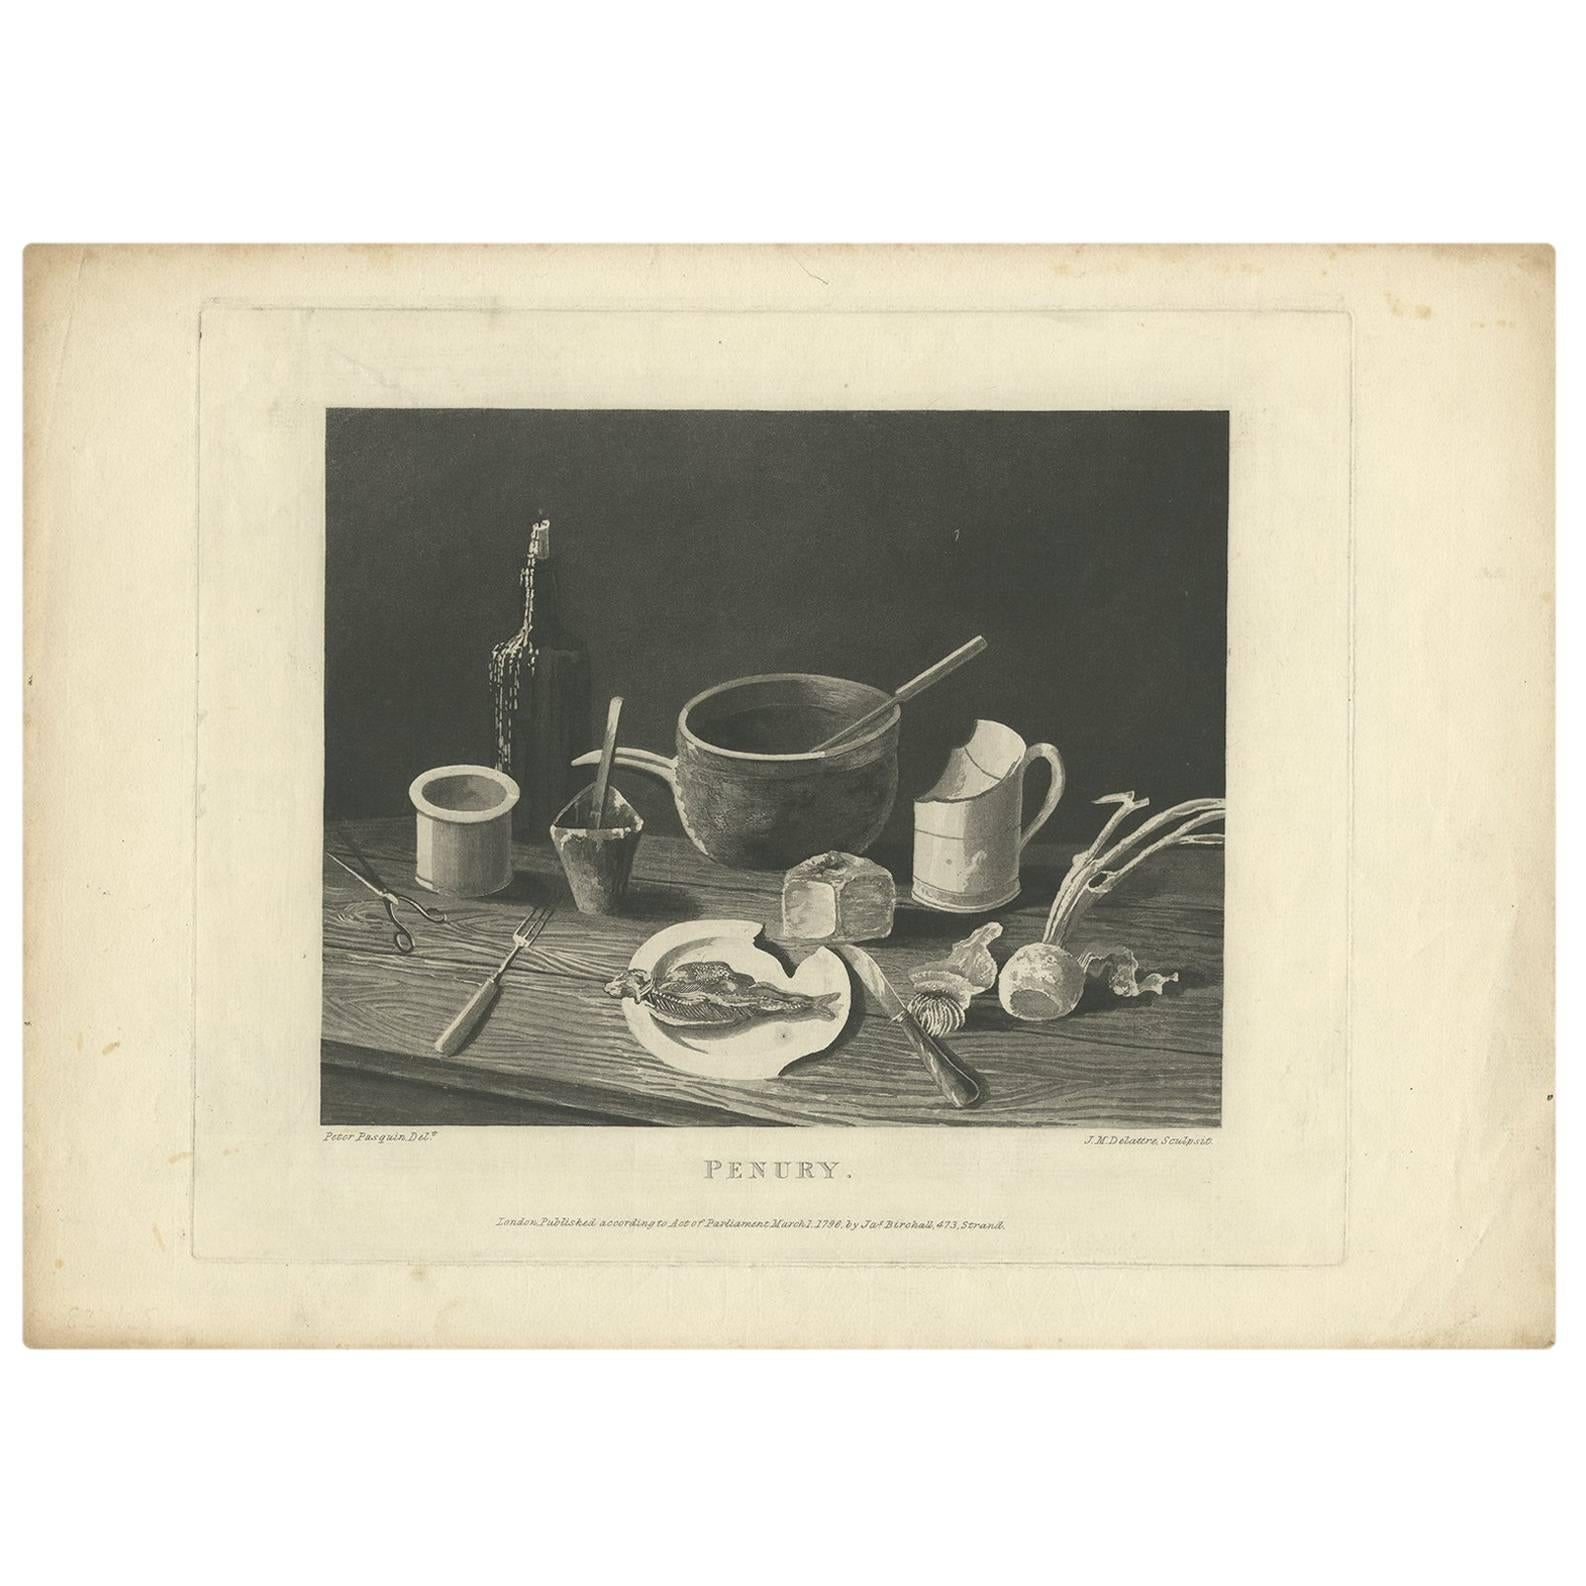 Antique Print of 'Penury' Made After P. Pasquin, 1796